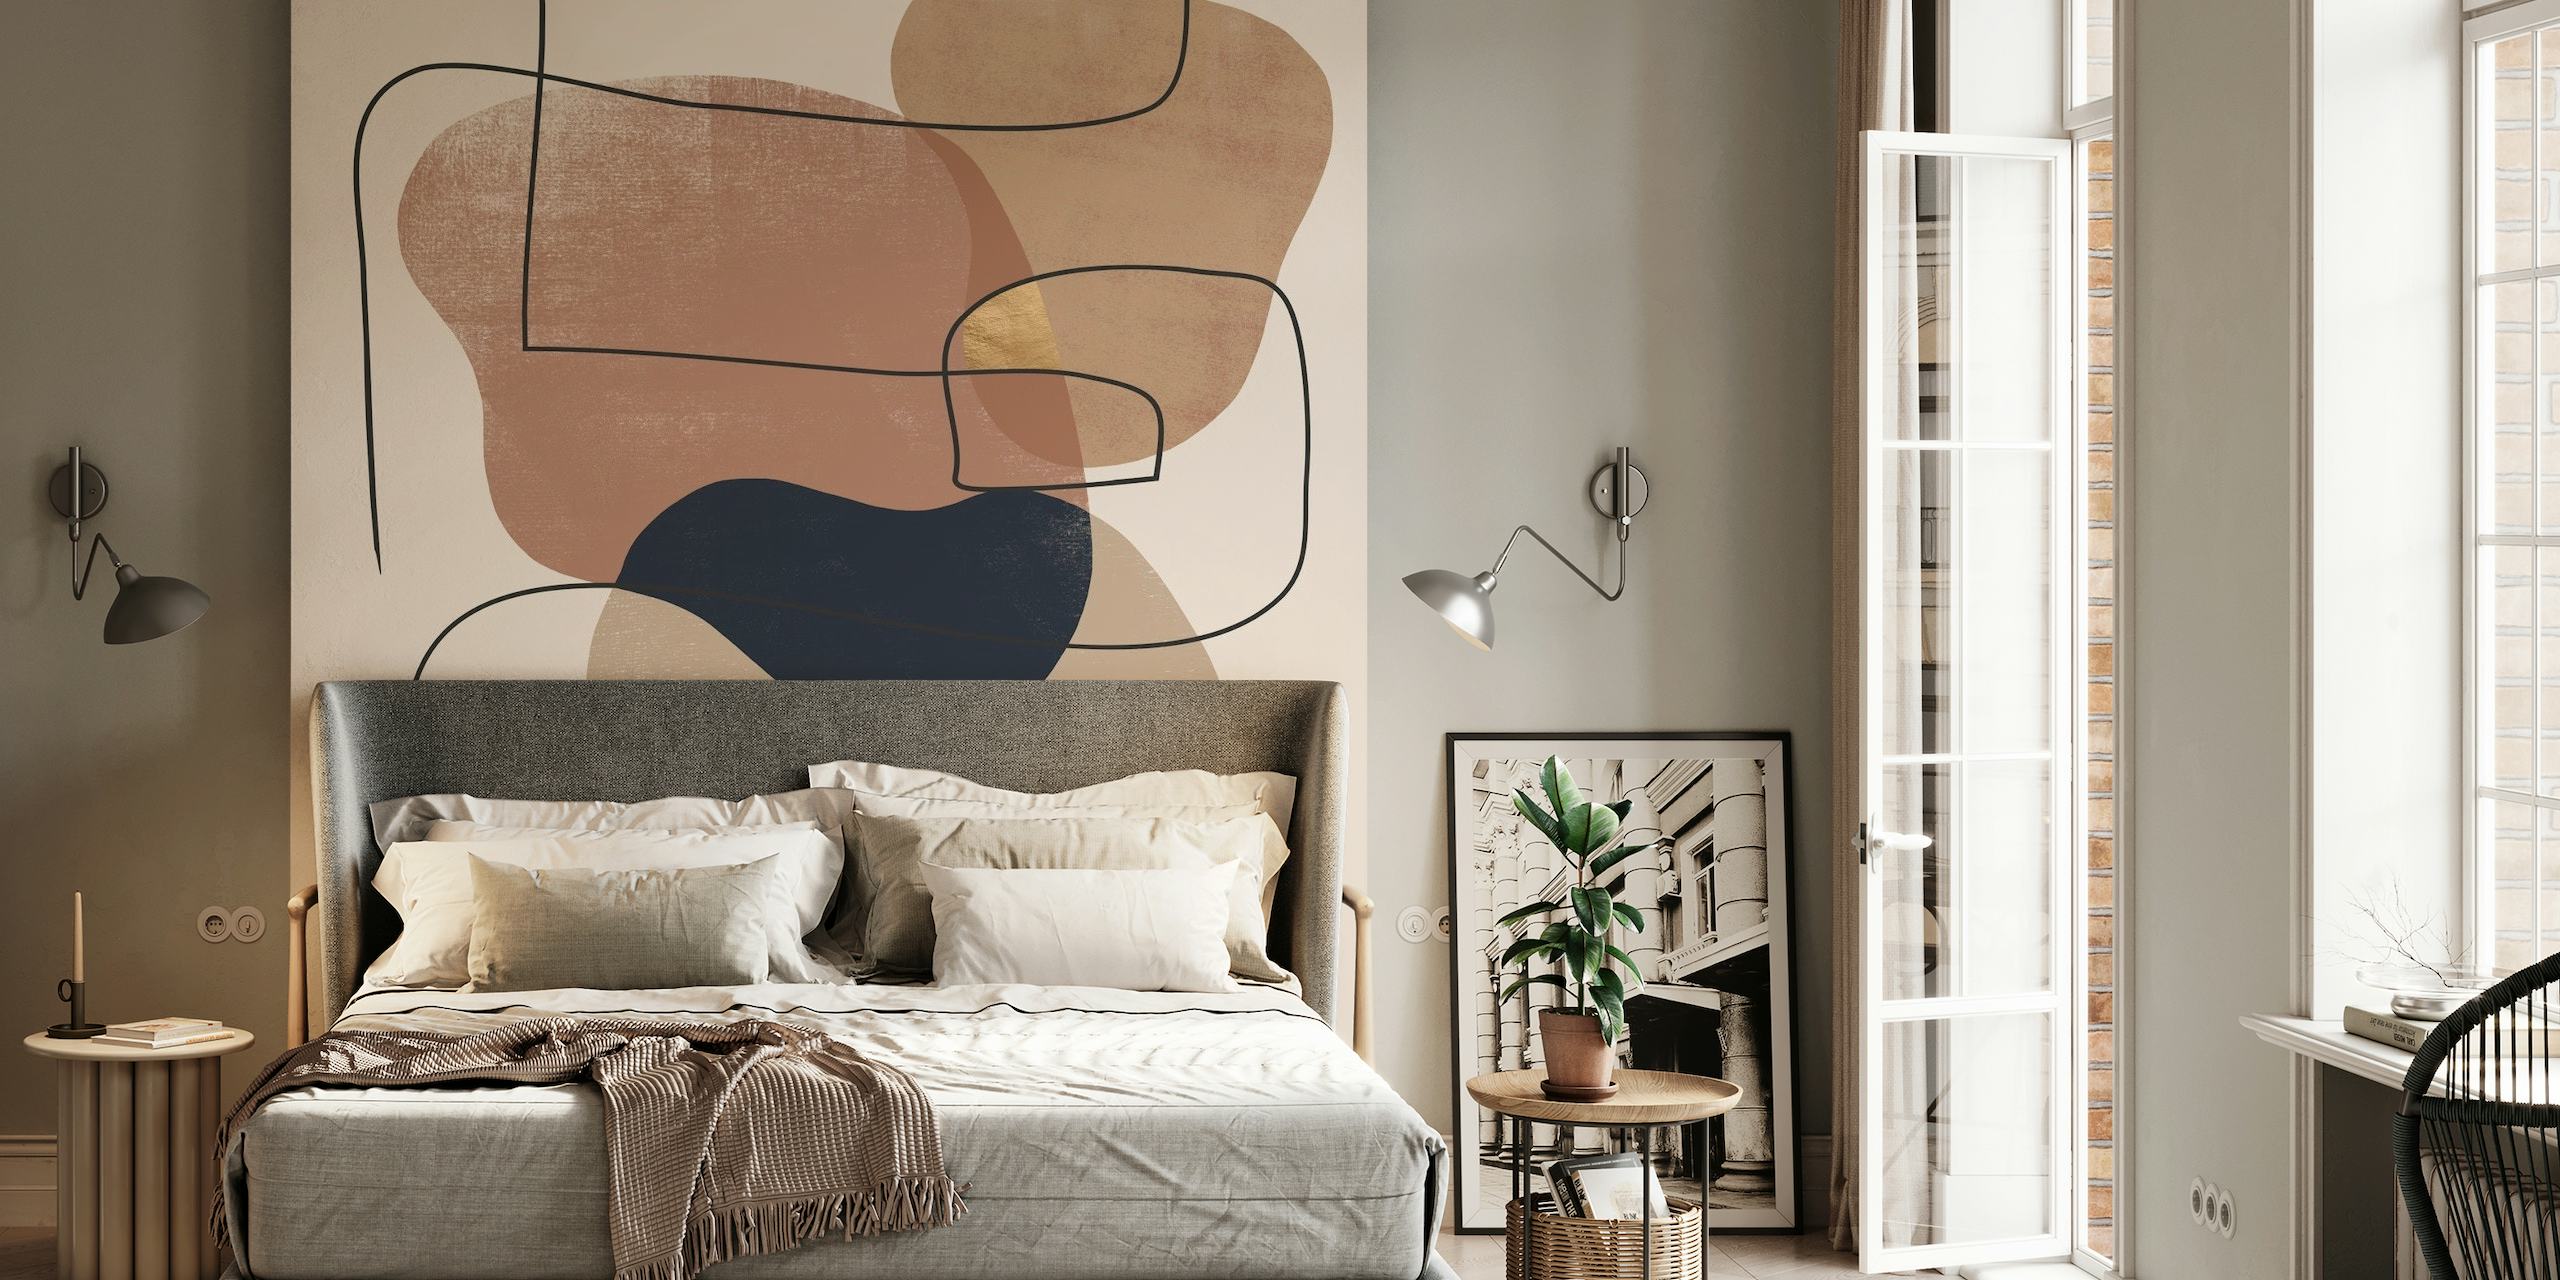 SHE Sand 6 abstract wall mural with flowing shapes in sand tones and navy